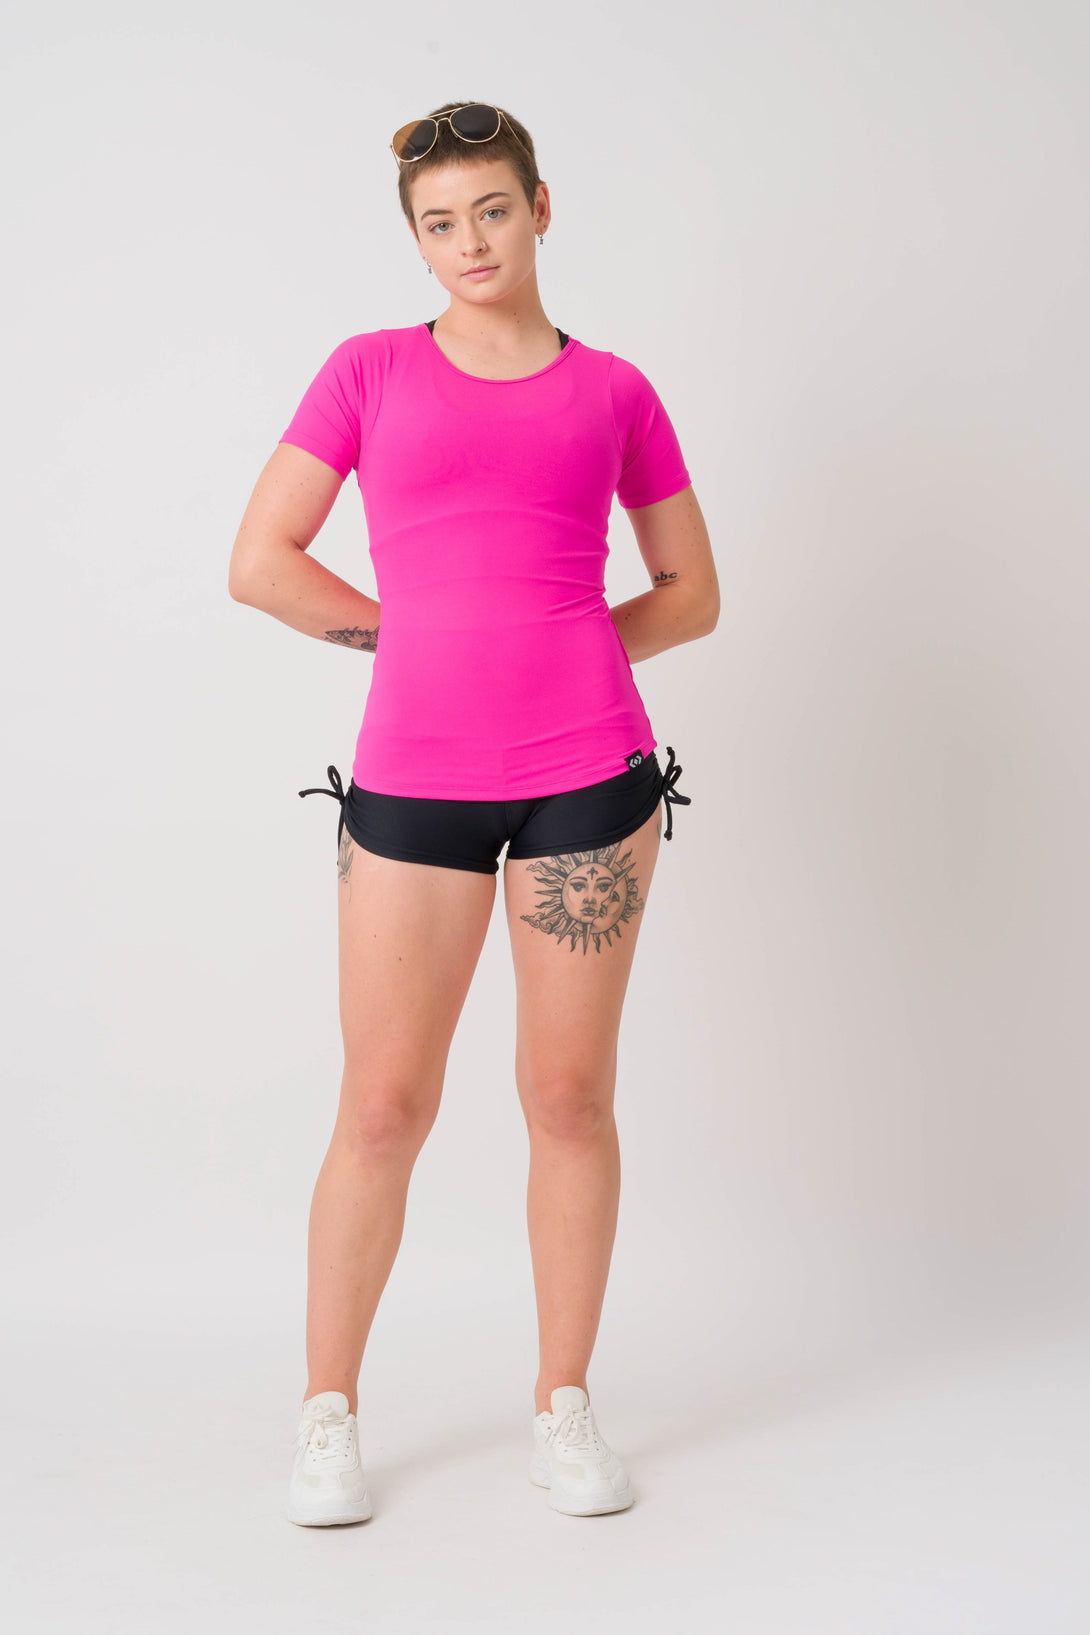 Pink Soft To Touch - Fitted Tee-Activewear-Exoticathletica